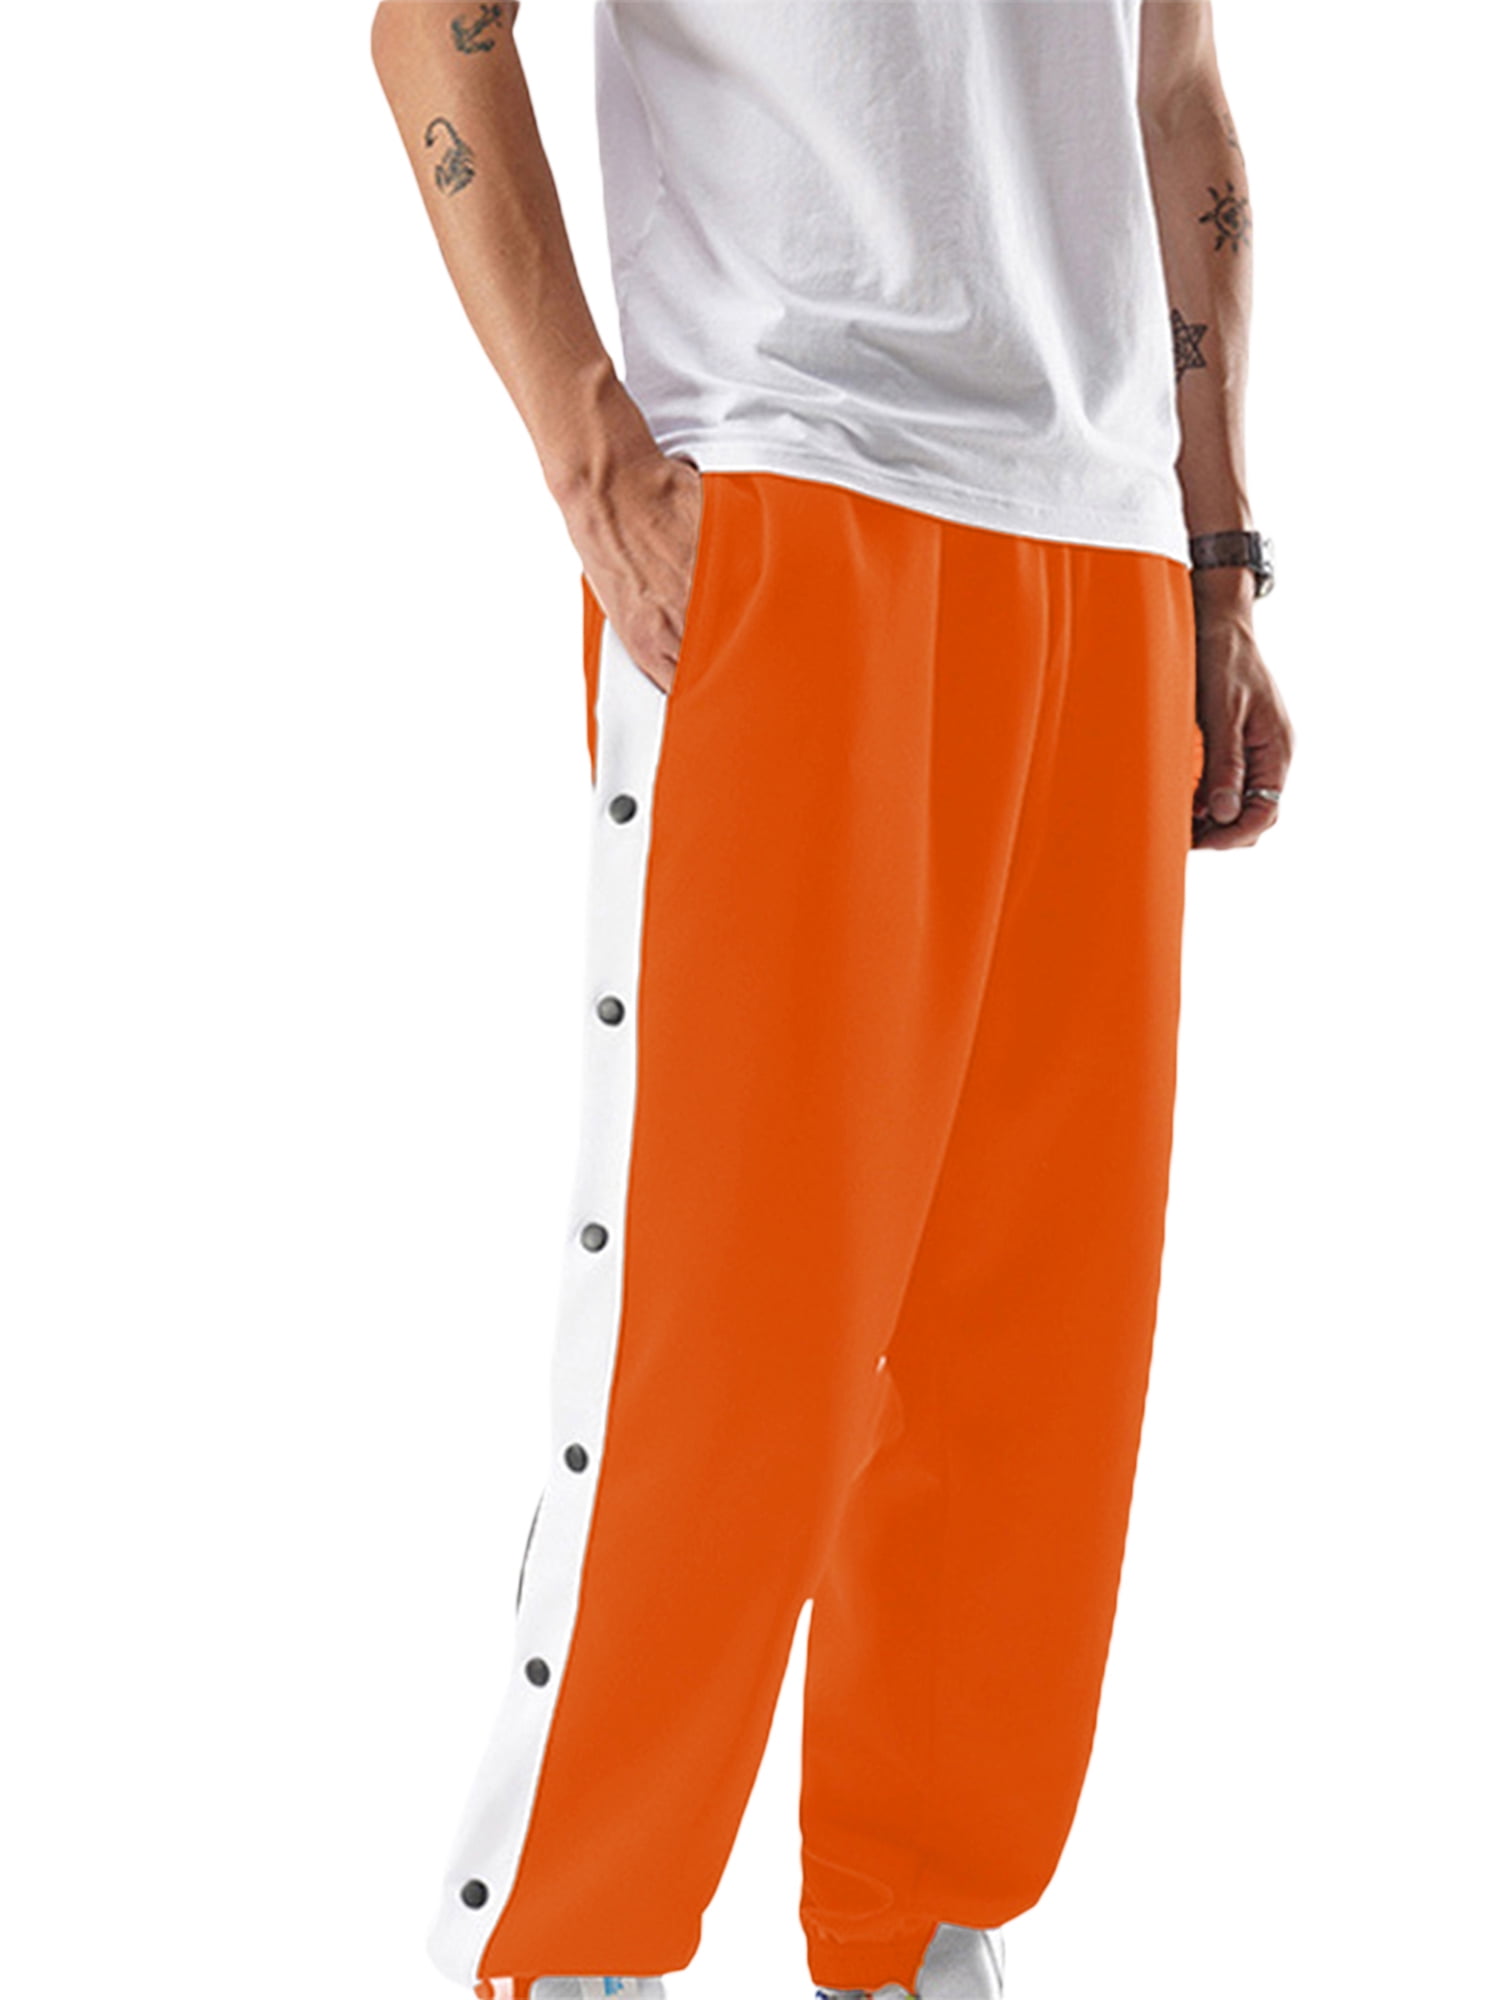 Mens Tapered Pants Side Full Button Athlete Sports Gym Basketball Trousers  | eBay